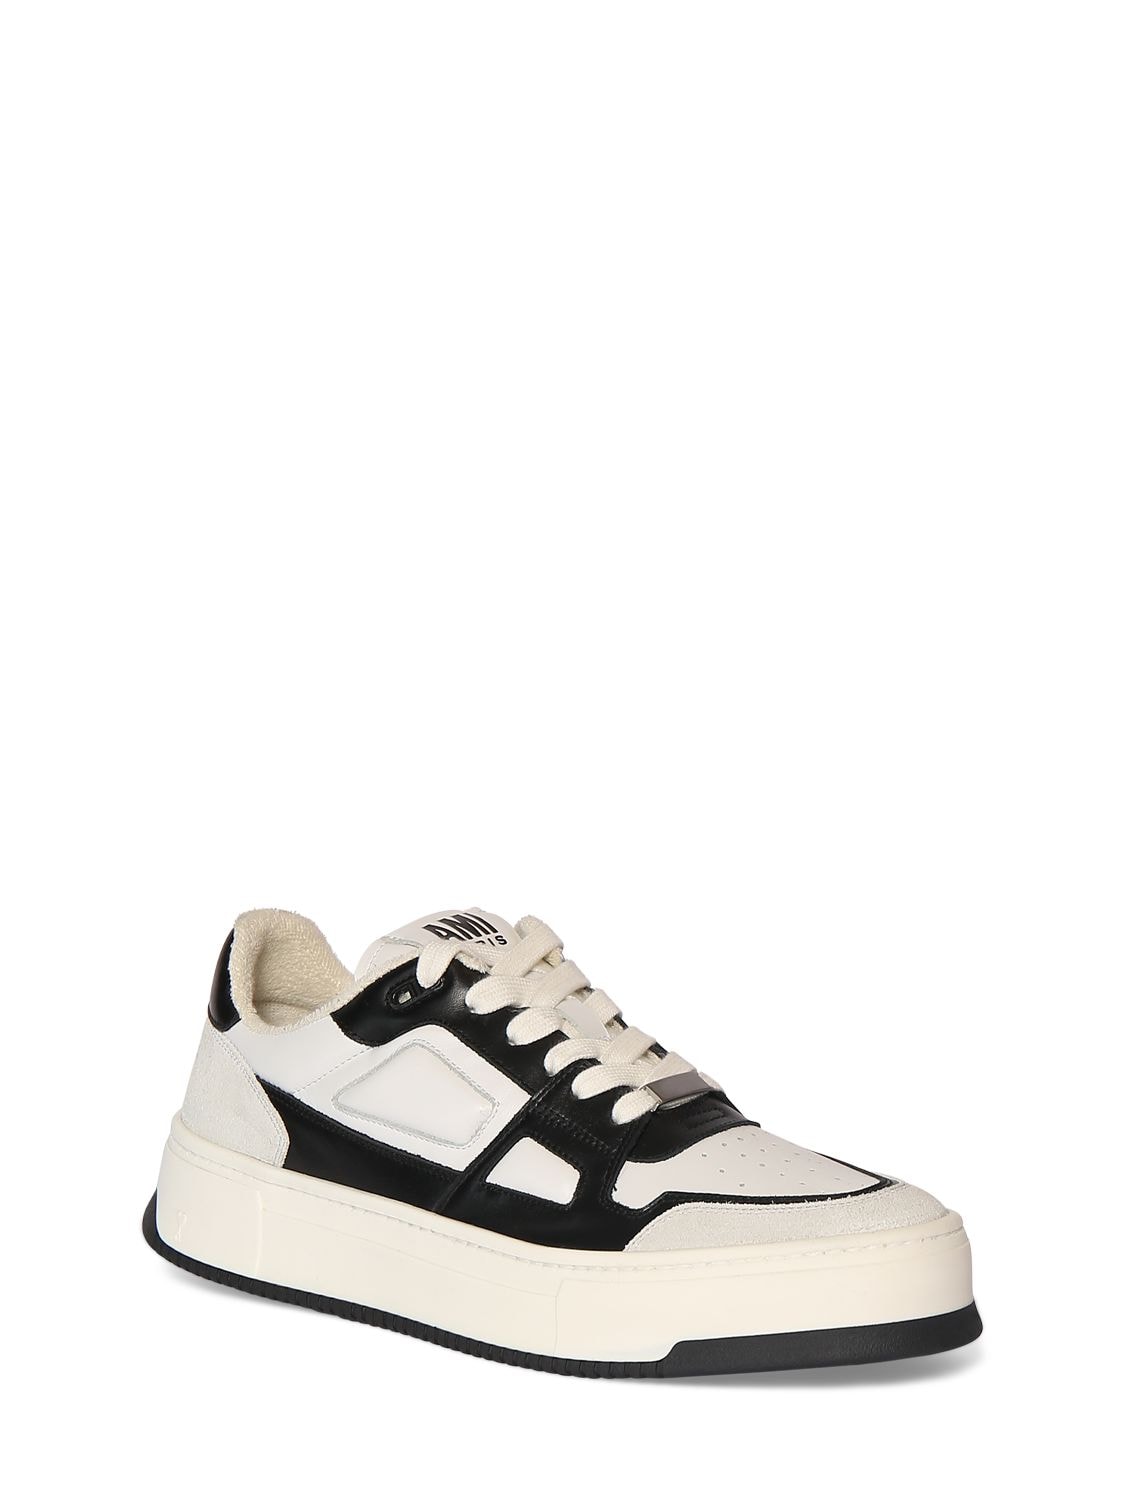 Shop Ami Alexandre Mattiussi New Arcade Leather Low Top Sneakers In White,black